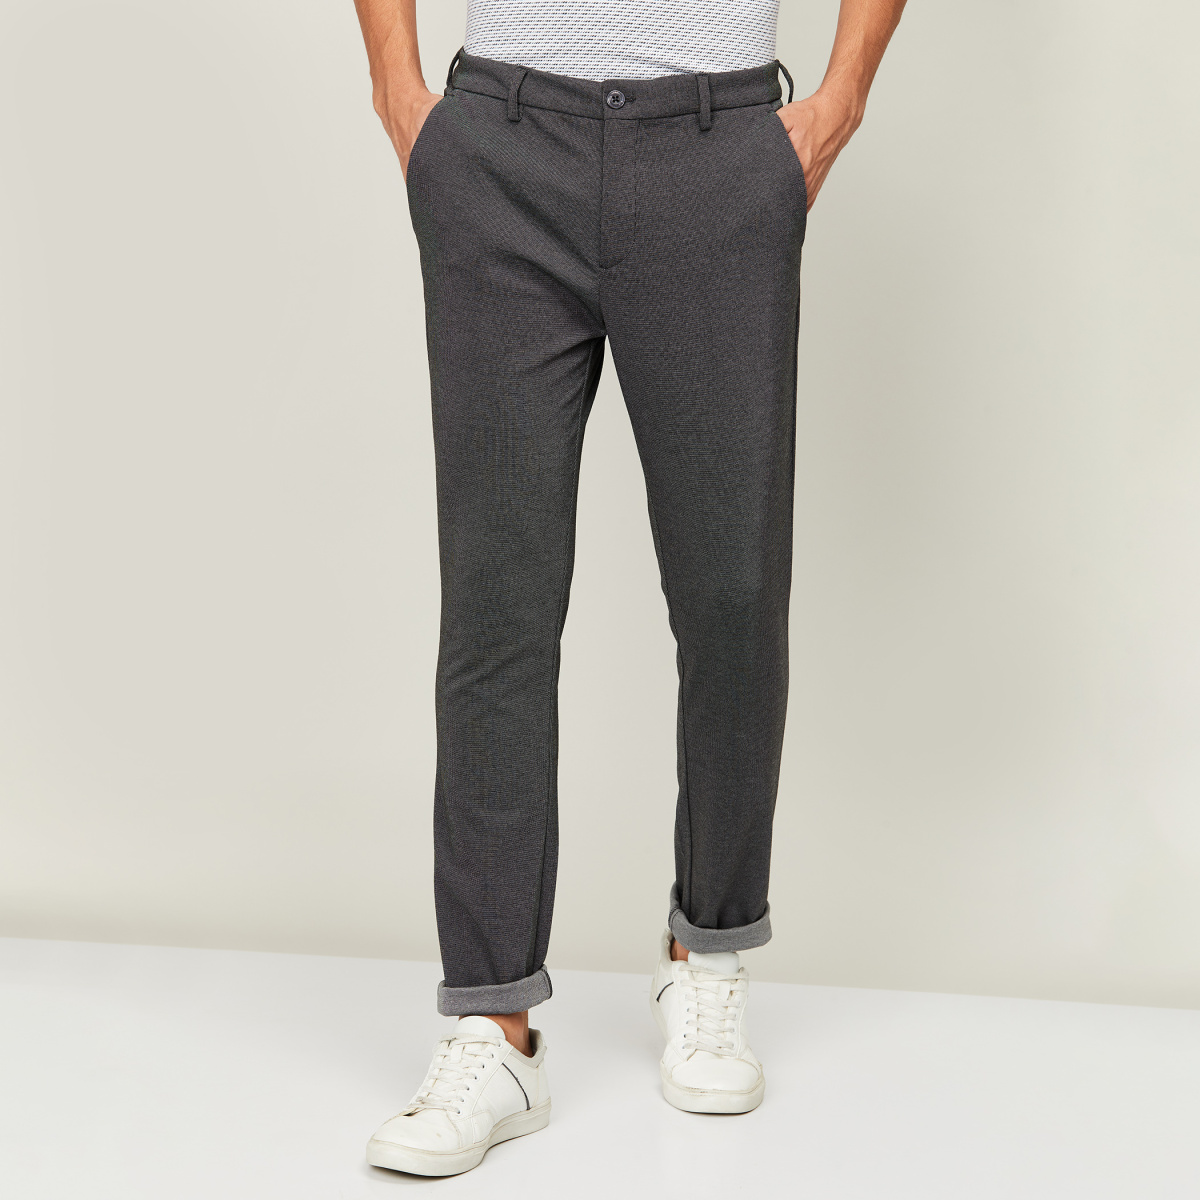 UNITED COLORS OF BENETTON Men Textured Slim Tapered Casual Trousers